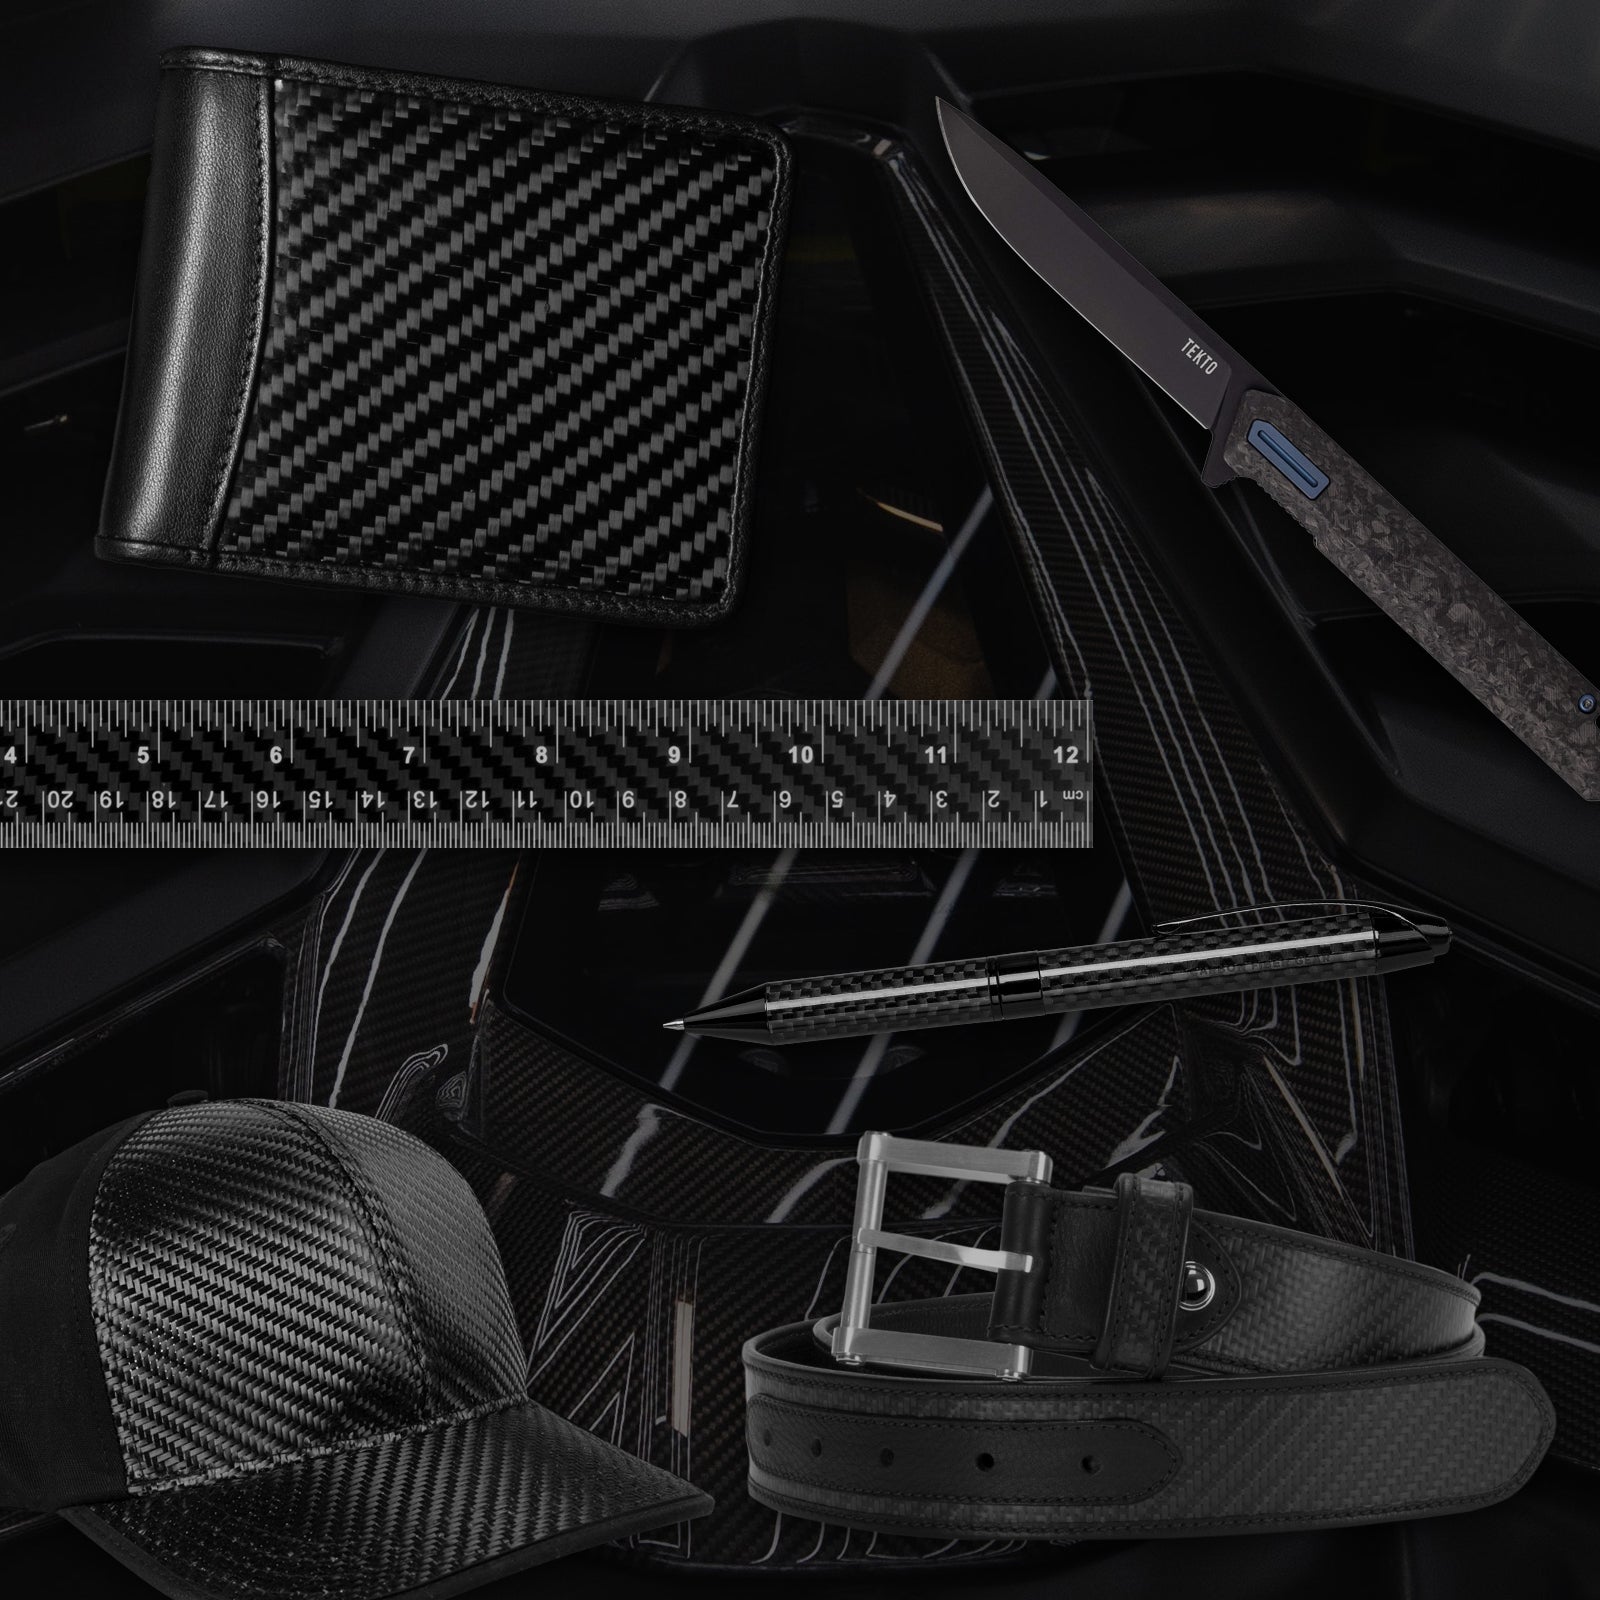 Carbon Fiber Gear - REAL Carbon Fiber Accessories, Gifts, and More